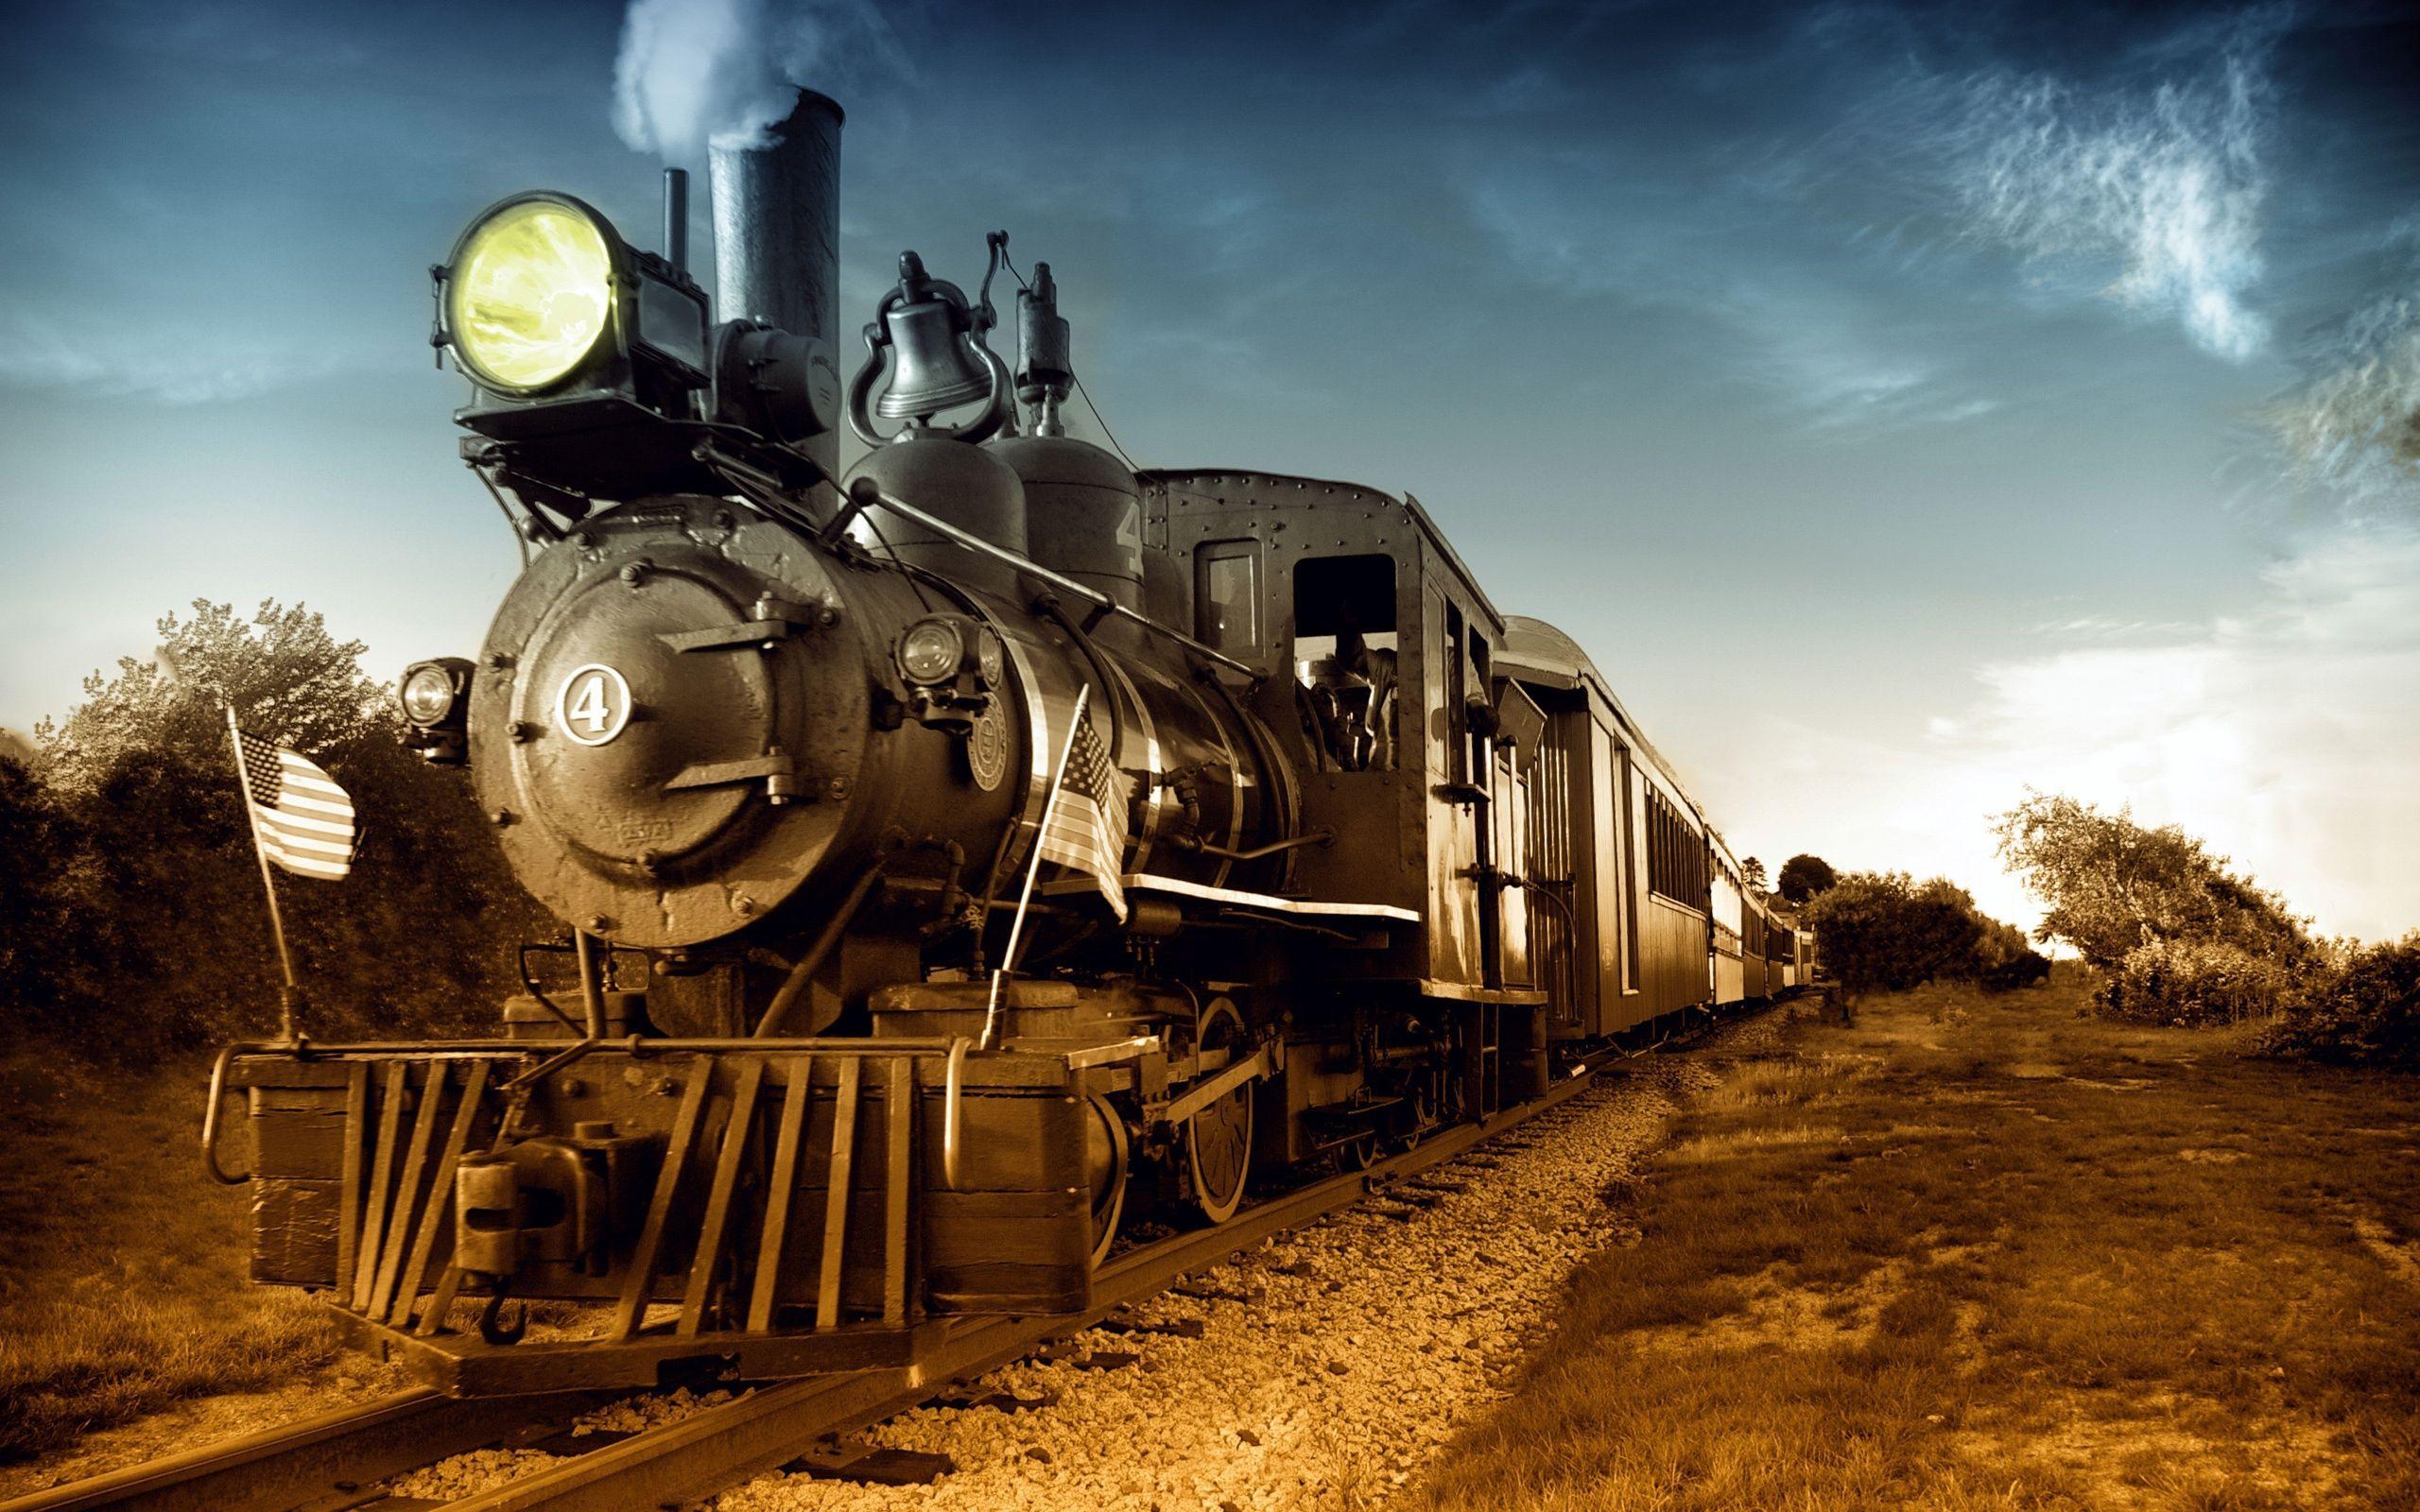 OLD TRAINS. Old Train HD Wallpaper. Old Trains & Old Things